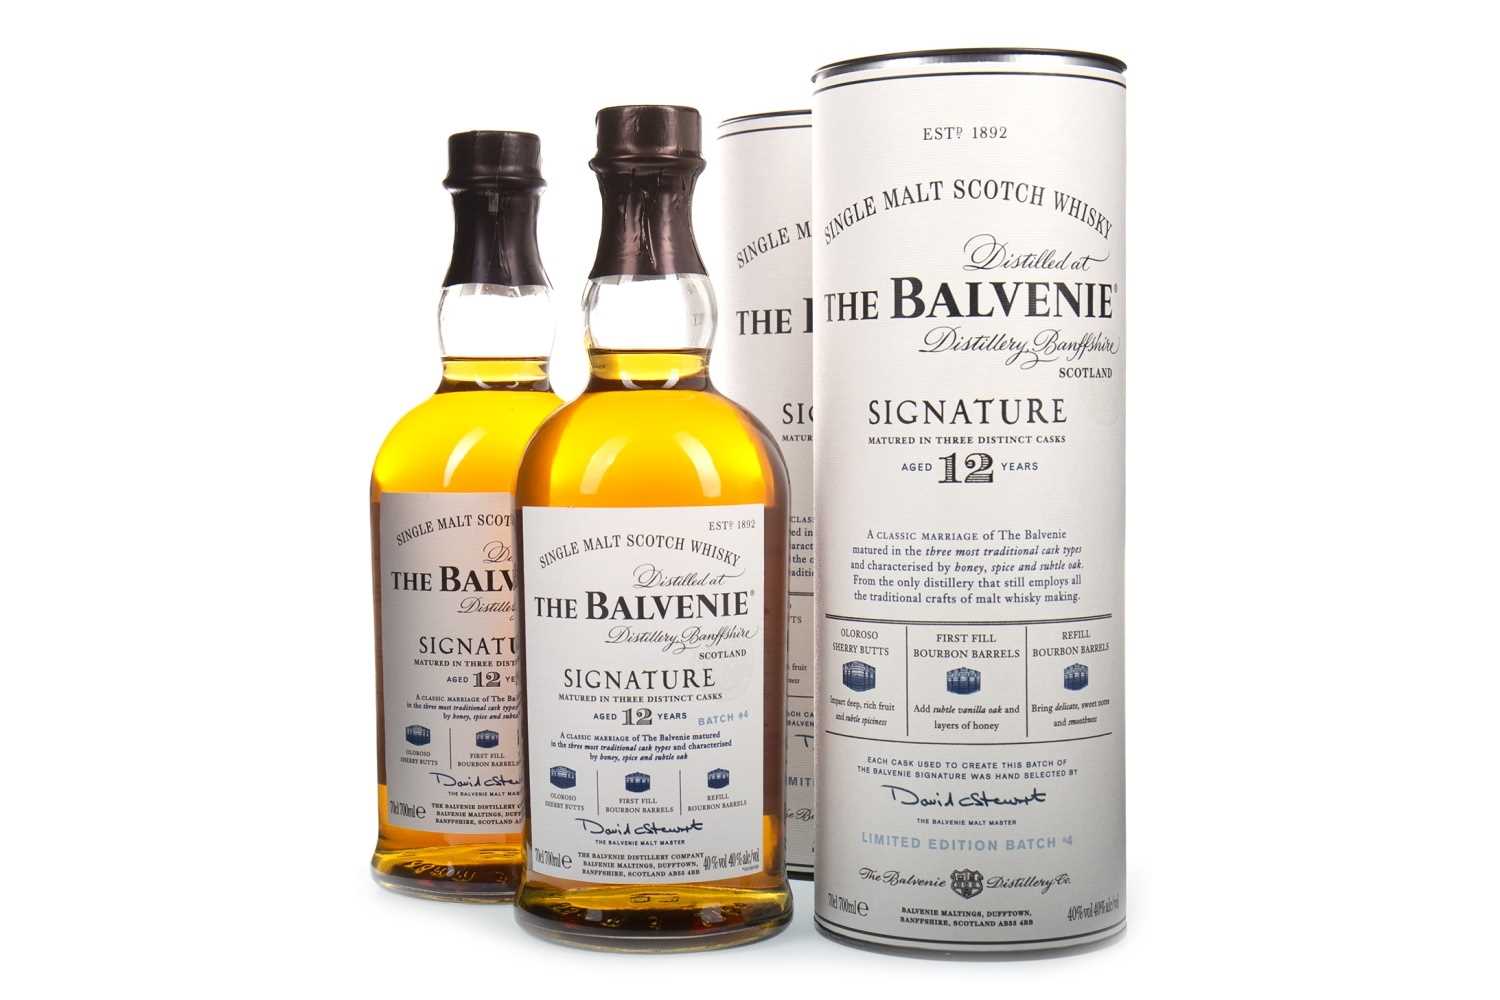 Lot 70 - BALVENIE SIGNATURE AGED 12 YEARS BATCH NO. 4 AND 5